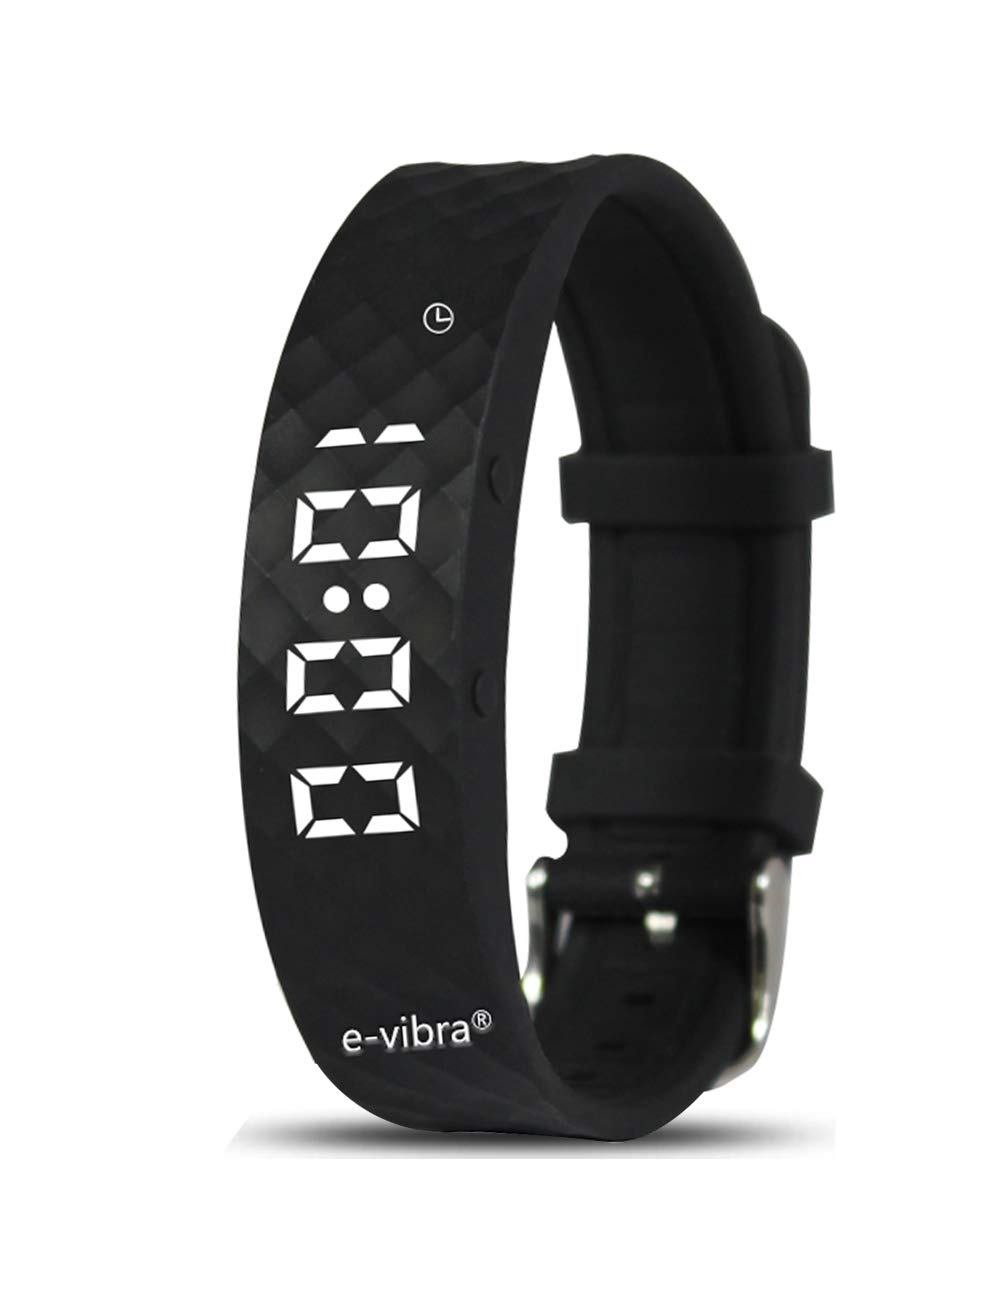 E-Vibra Premium Potty Training Watch - Rechargeable Silent Vibrating Watch - Medical Reminder Watch - With Timer And 15 Daily Al